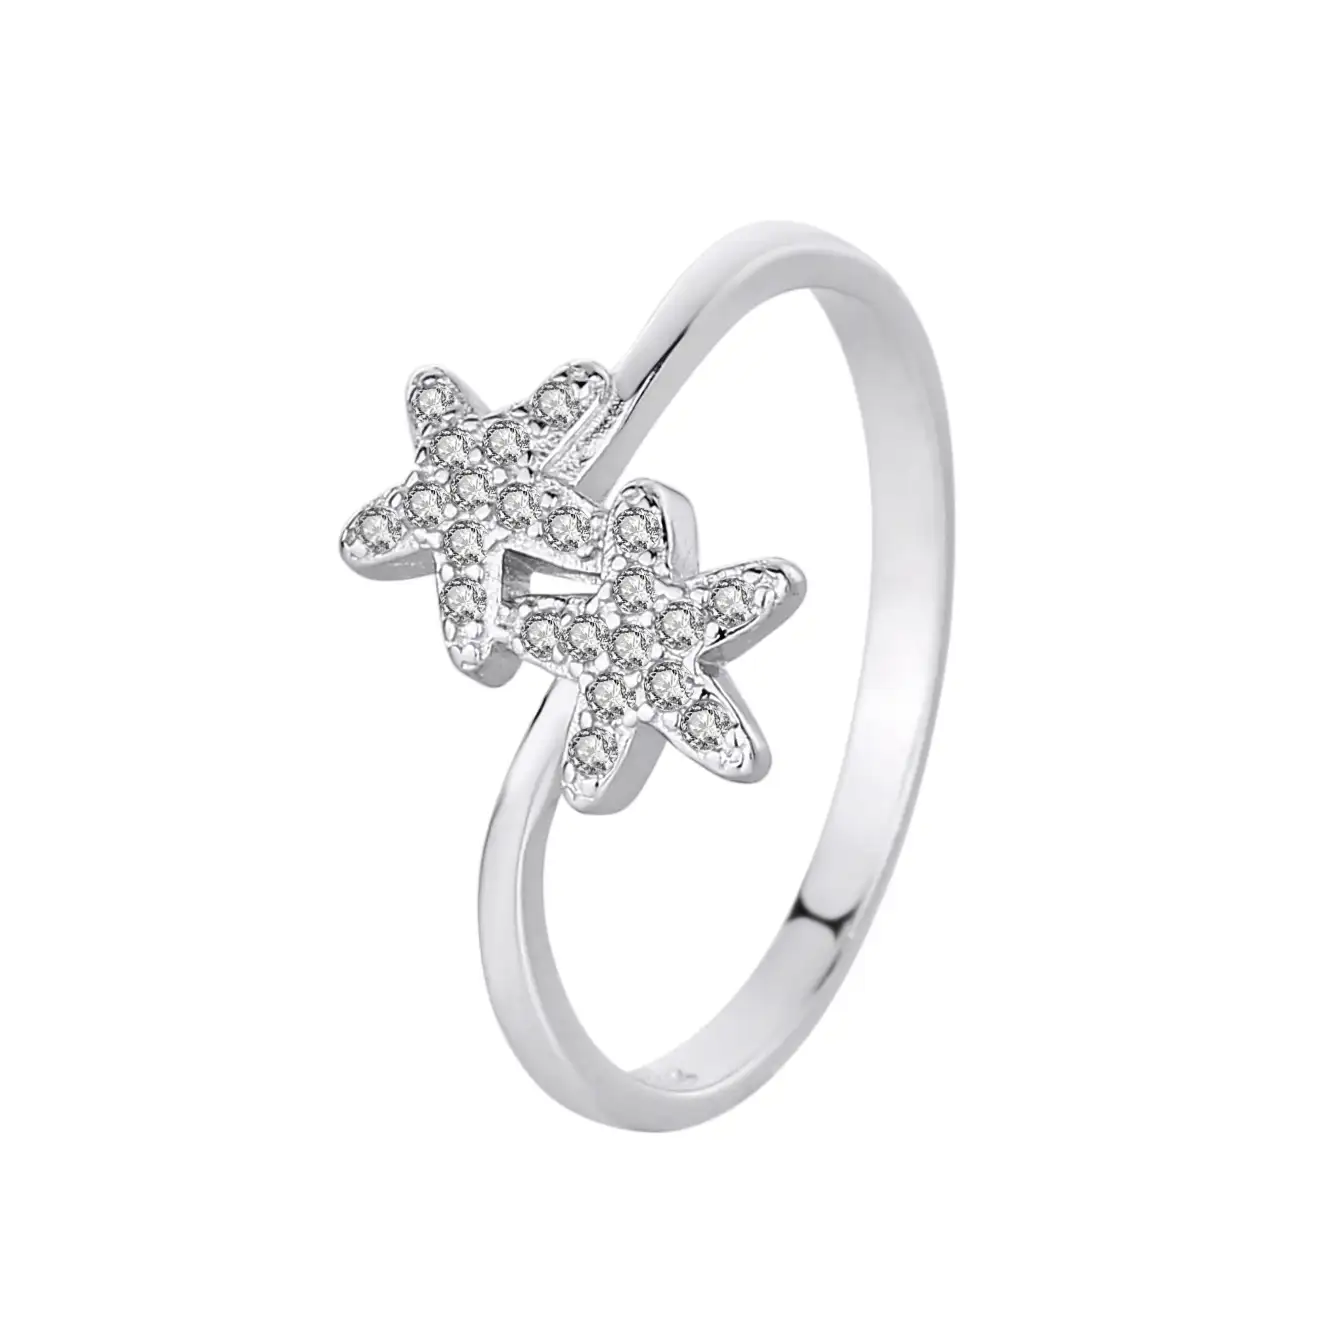 Silver Cubic Zirconia Flower Band Ring 70100013